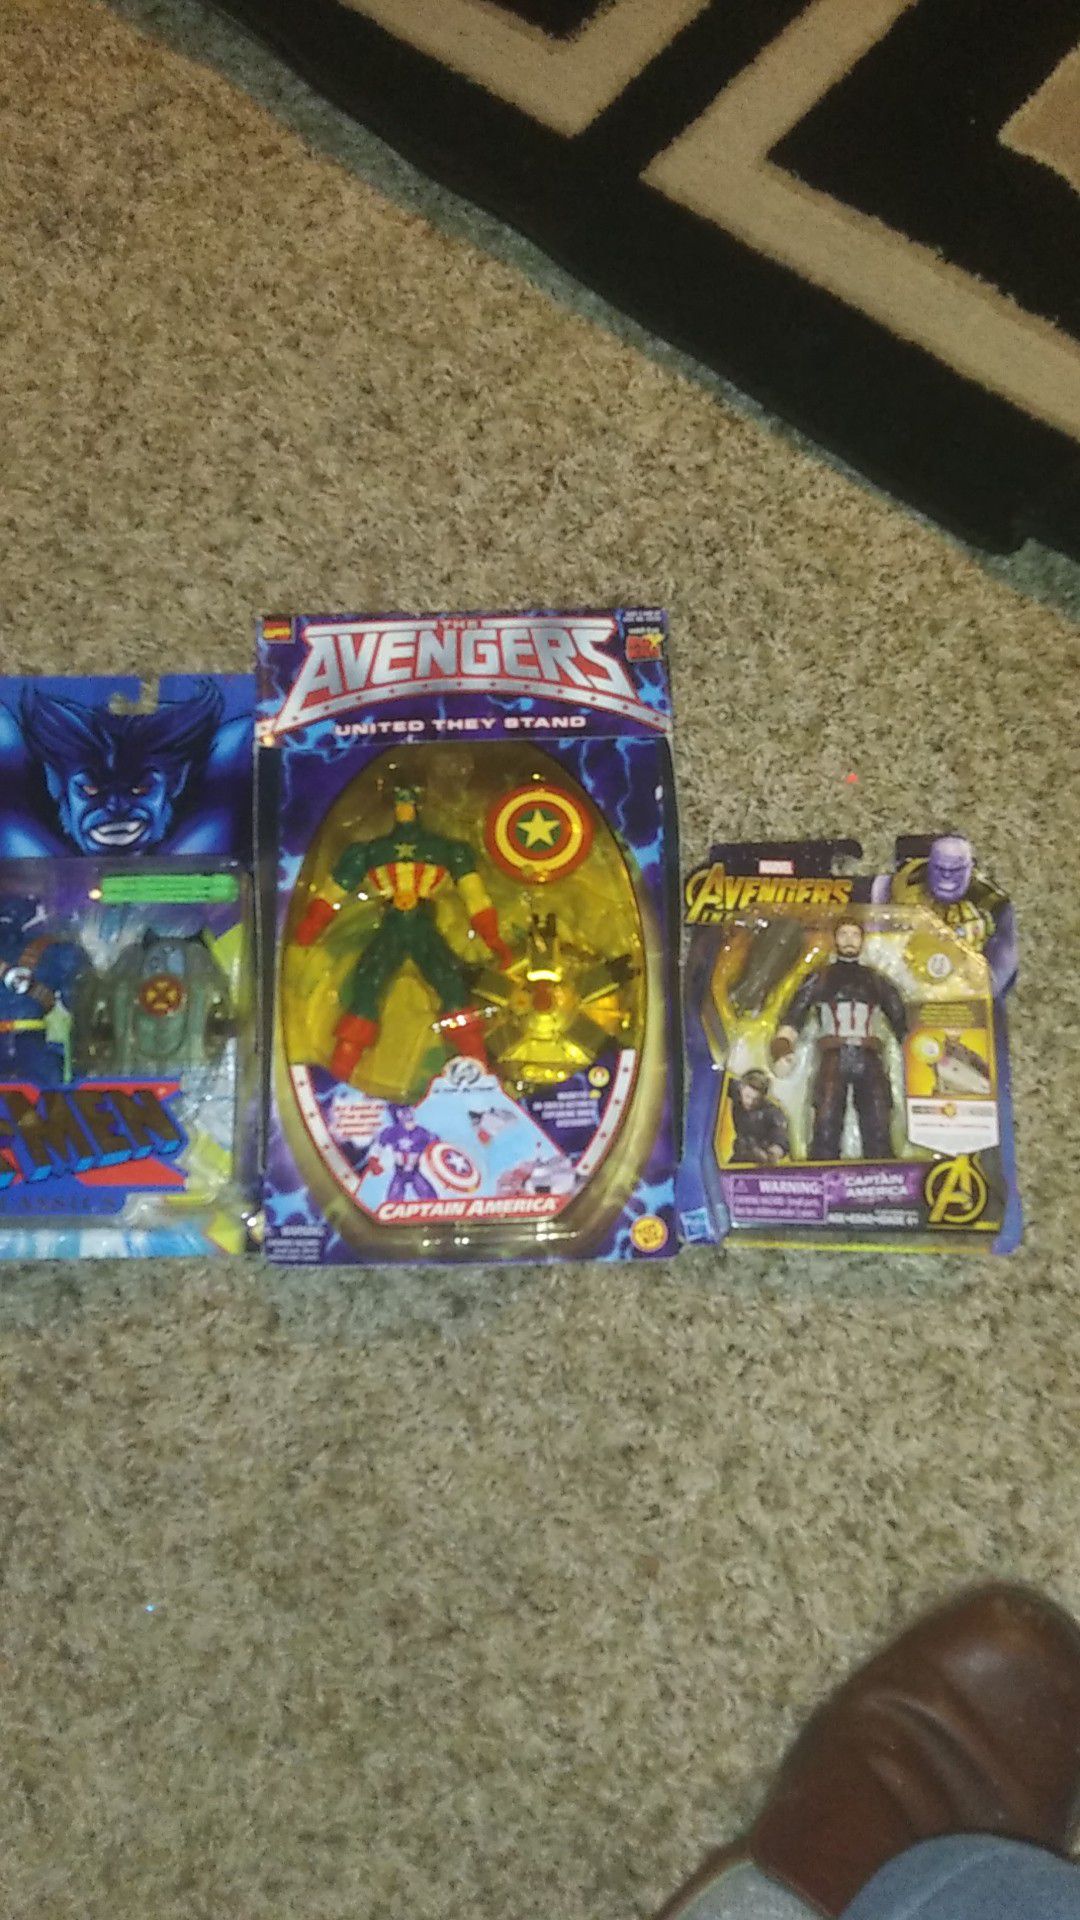 X-Men Marvel the Beast action figure The Avengers Captain America action figure your 1999 and year 2000